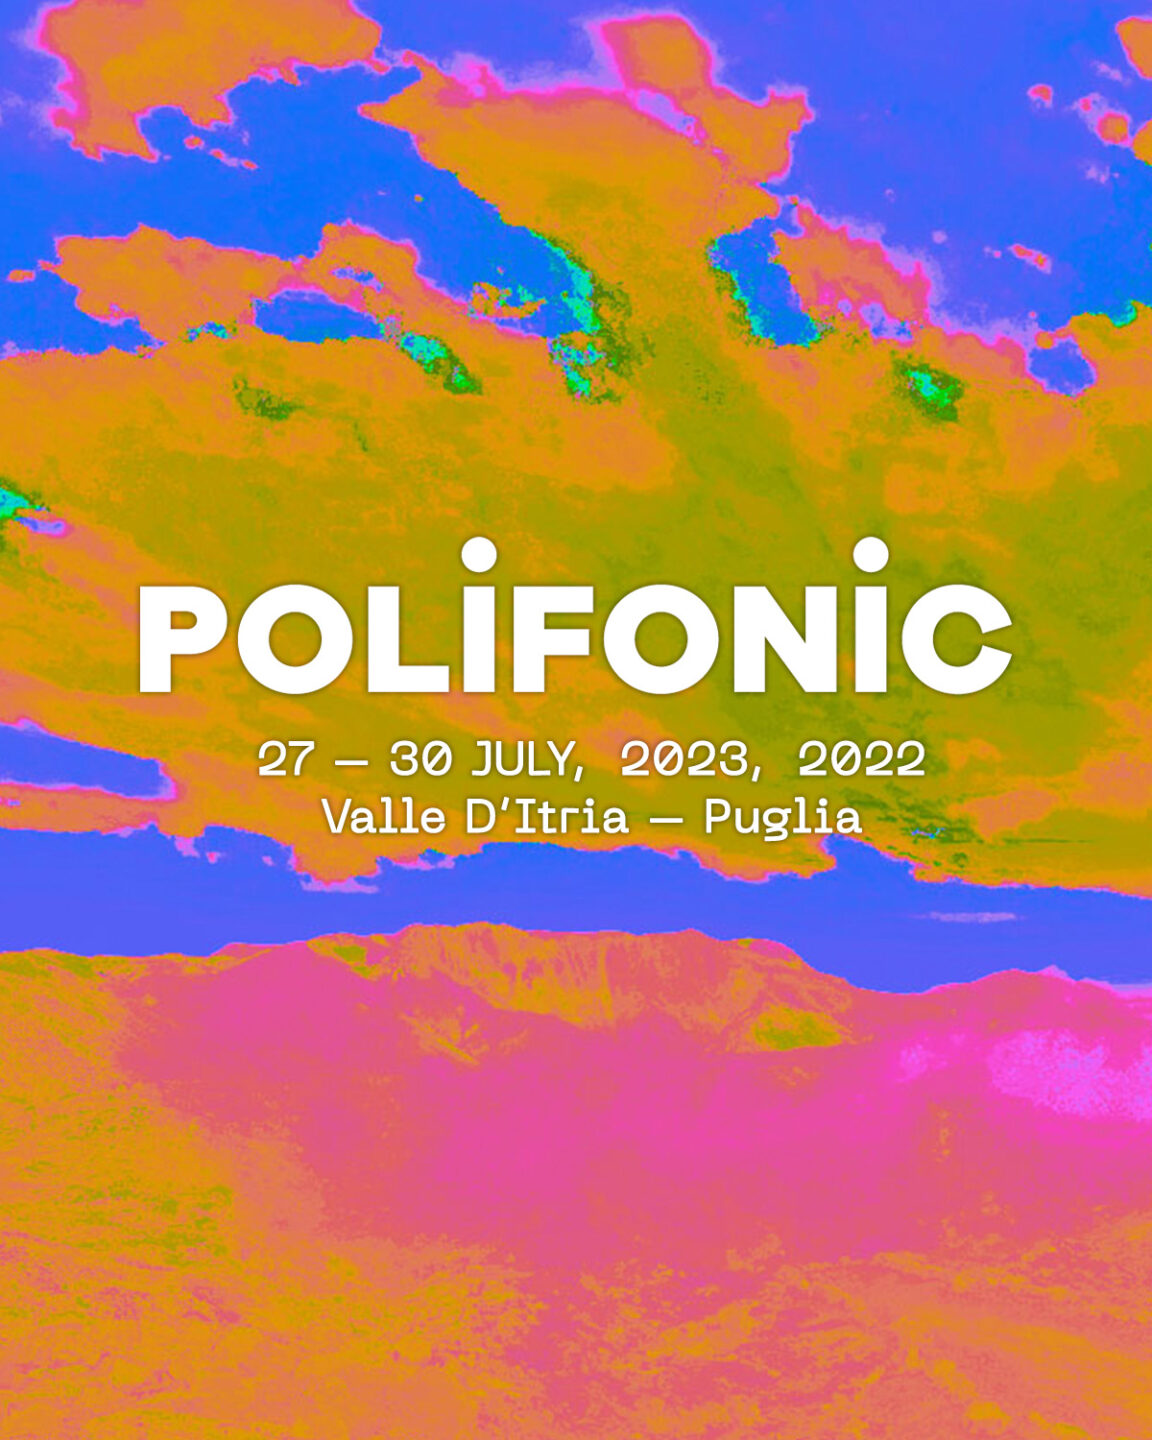 Peg & Co. - Polifonic 2023 - Book your Glamping Tent today!